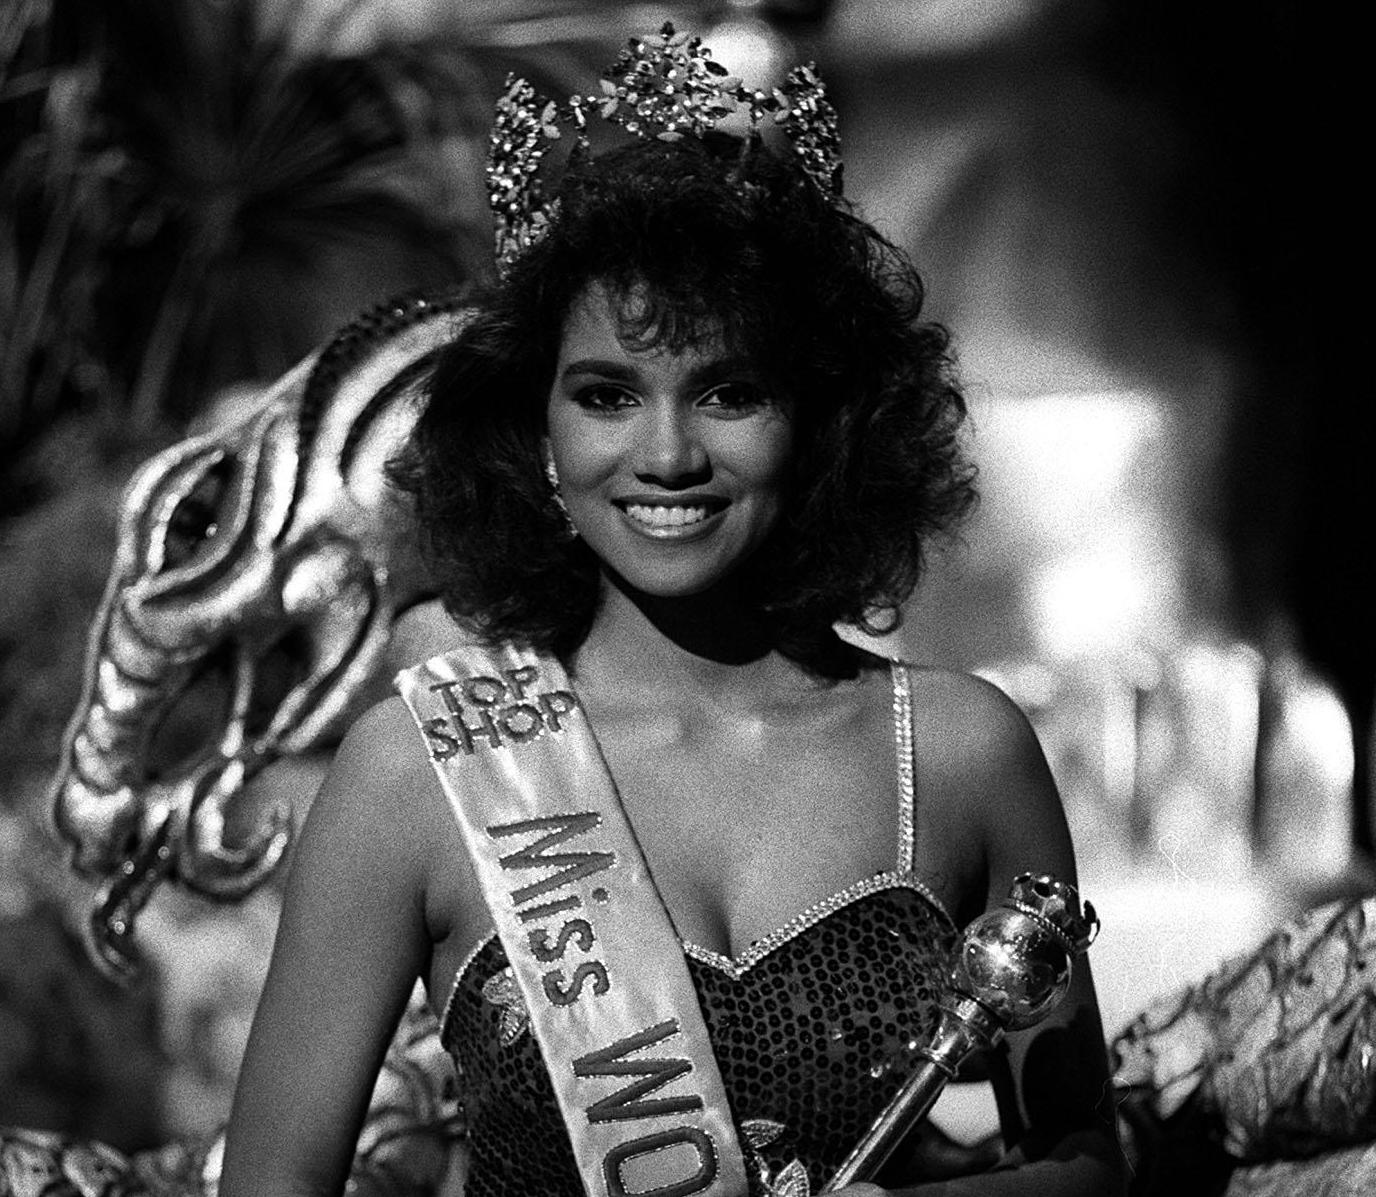 Halle Berry at the dress rehearsal of the Miss World Finals in 1986